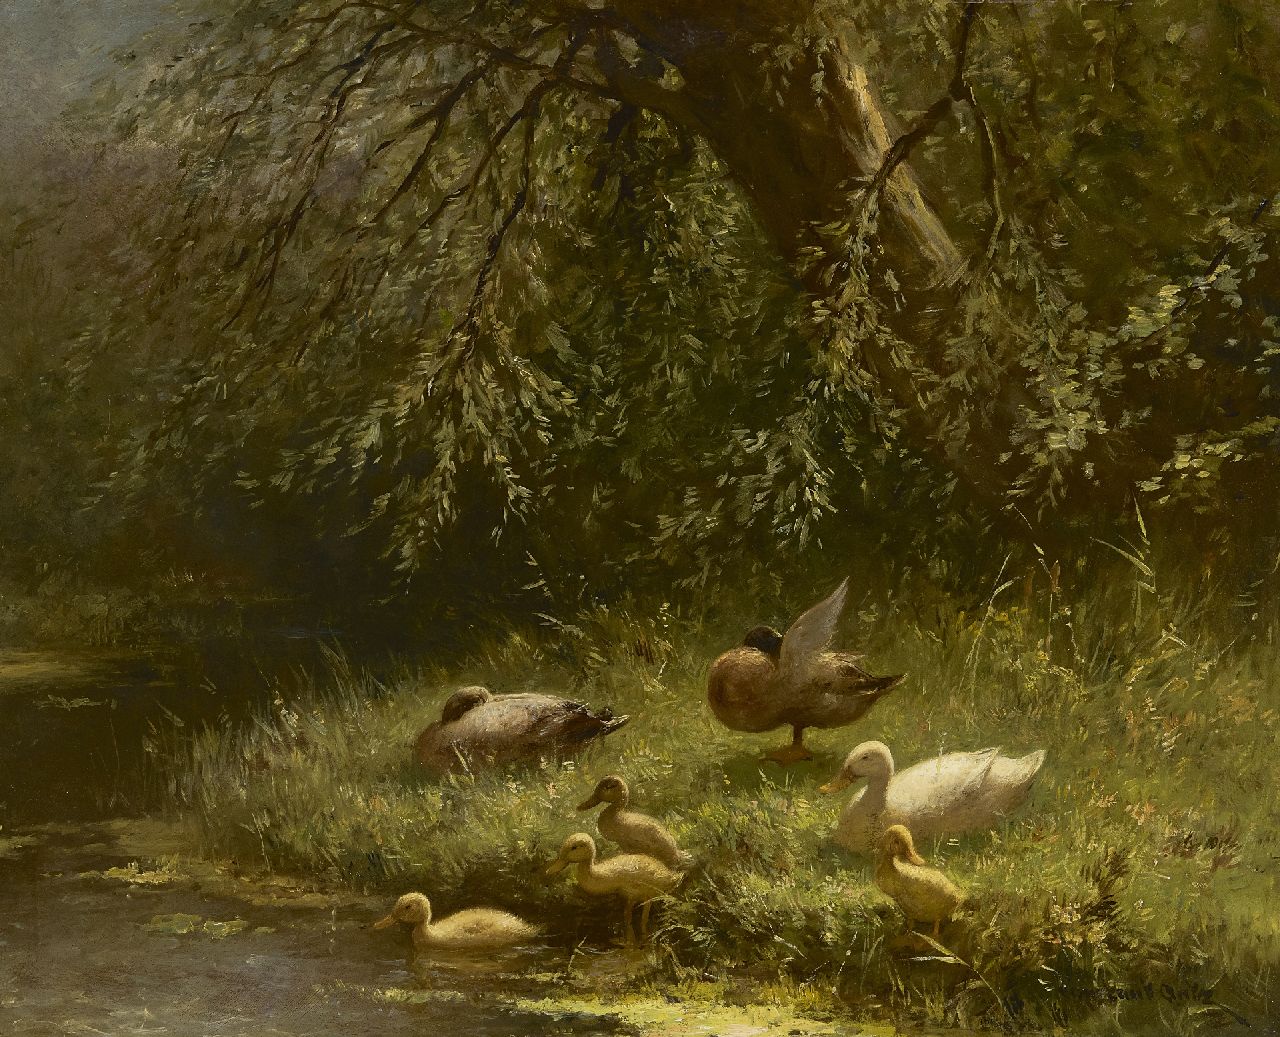 Artz C.D.L.  | 'Constant' David Ludovic Artz | Paintings offered for sale | Ducks near the waterfront, oil on panel 40.1 x 50.2 cm, signed l.r.